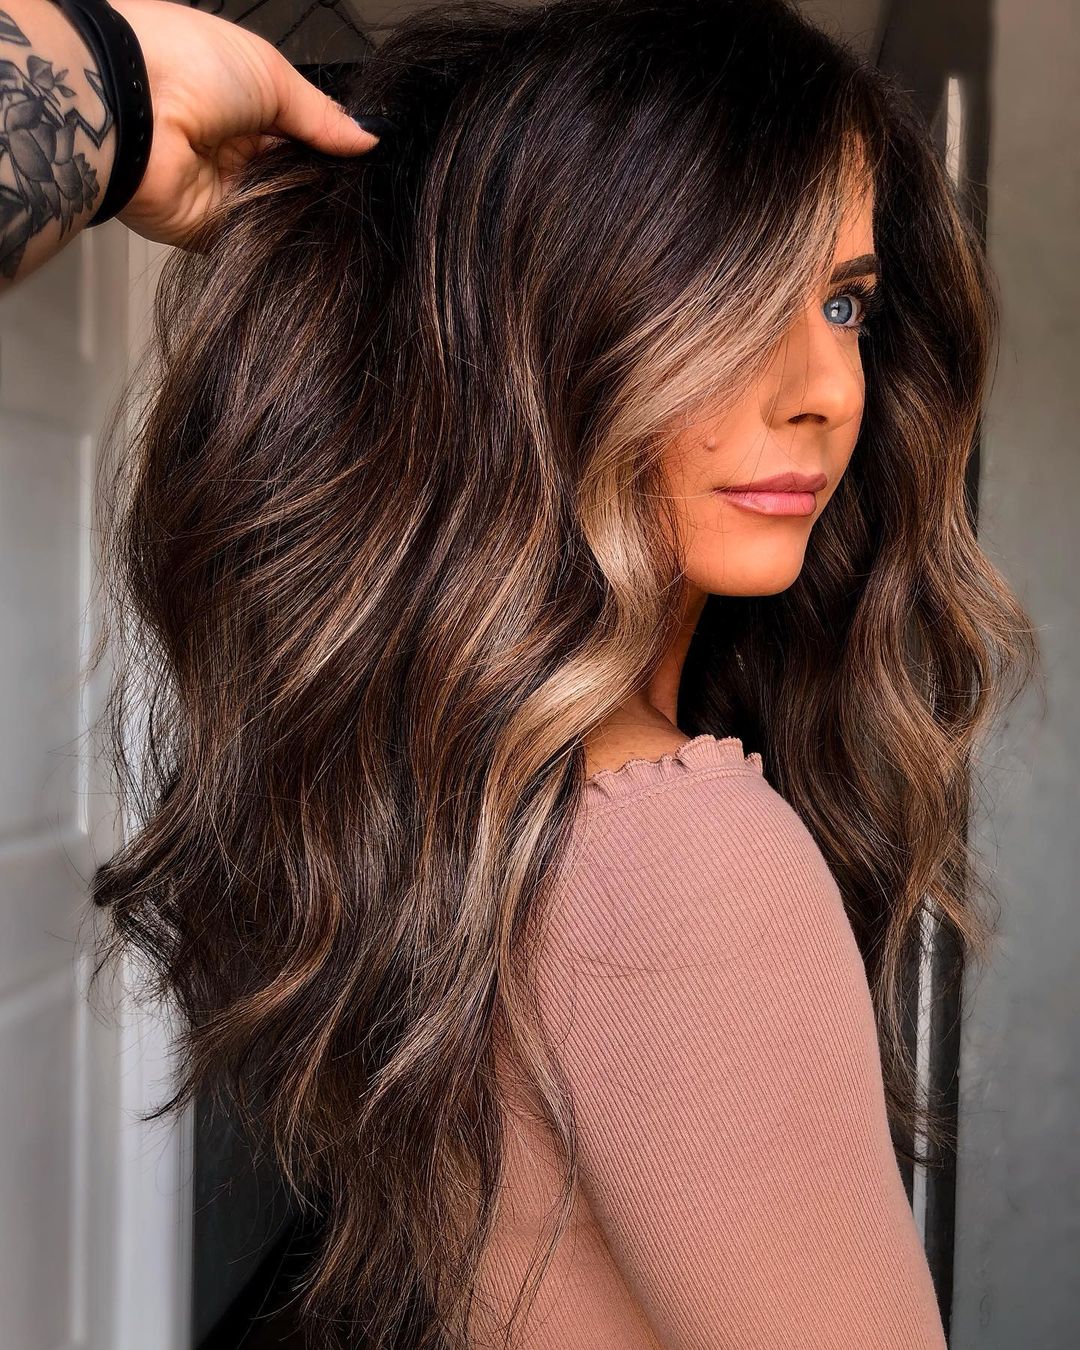 24 Gorgeous Reasons Why Balayage Isn't Just for Blondes